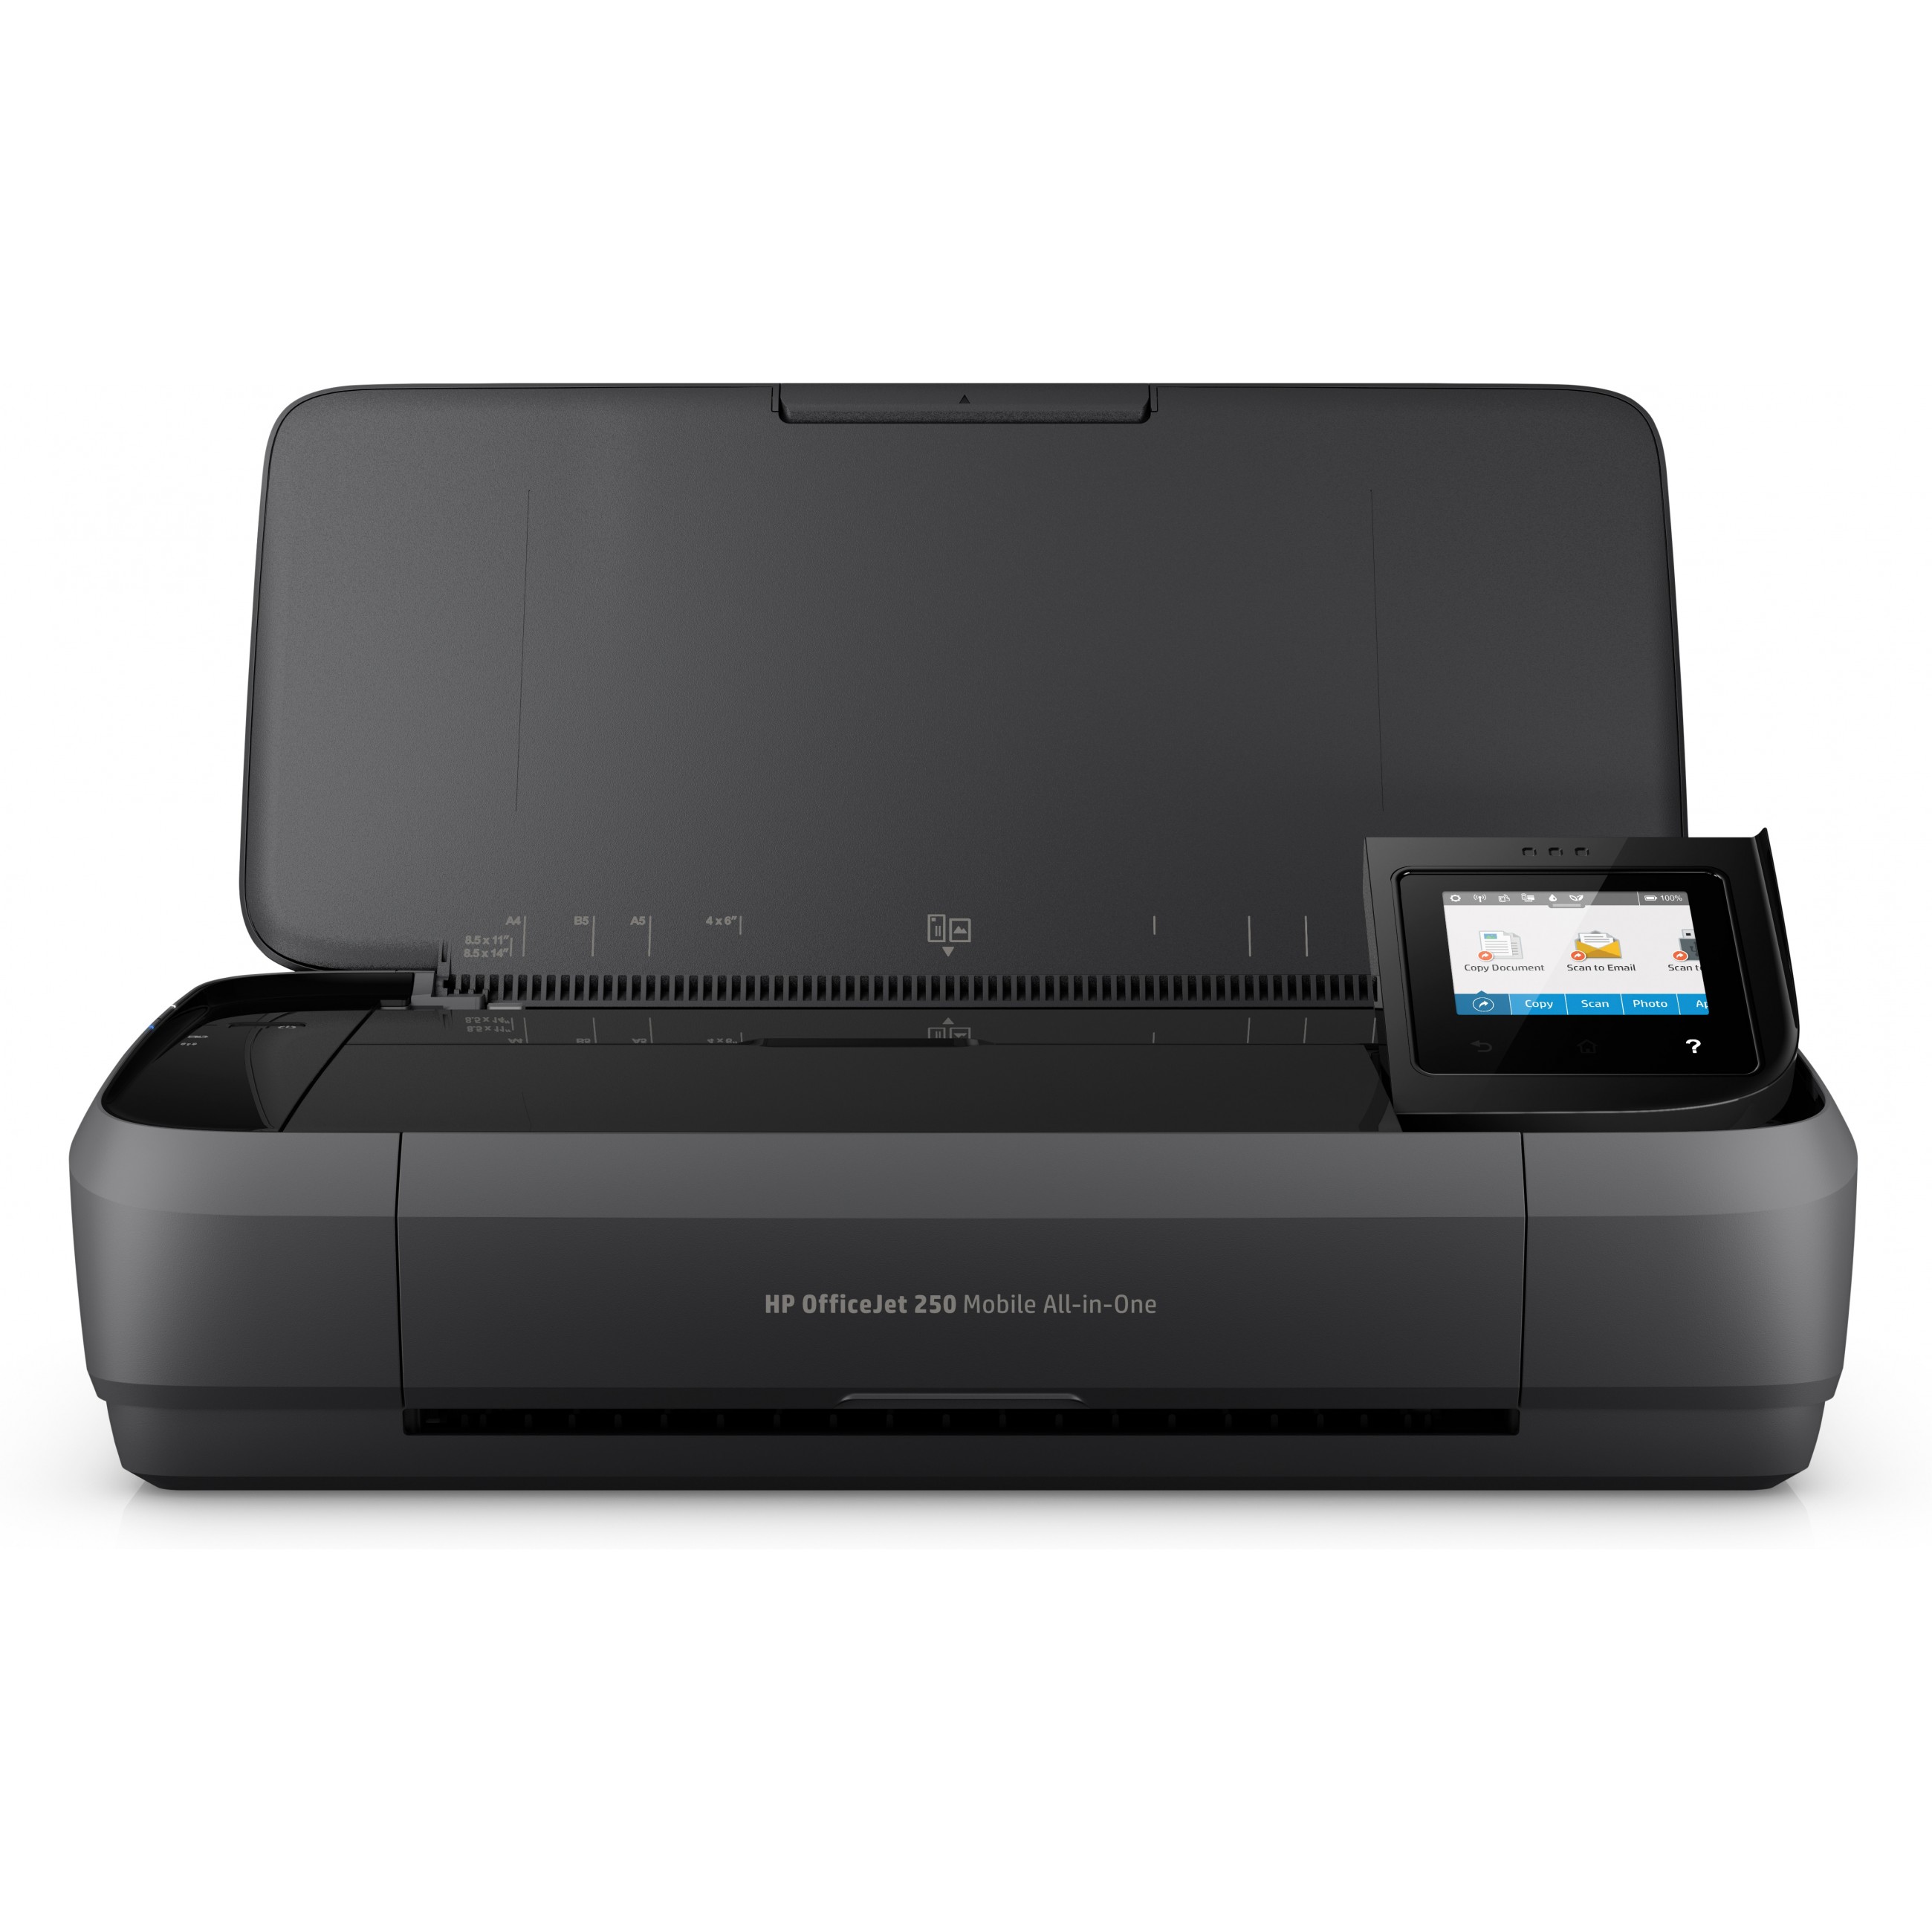 HP OfficeJet 250 Mobile All-in-One Printer - CZ992A#BHC